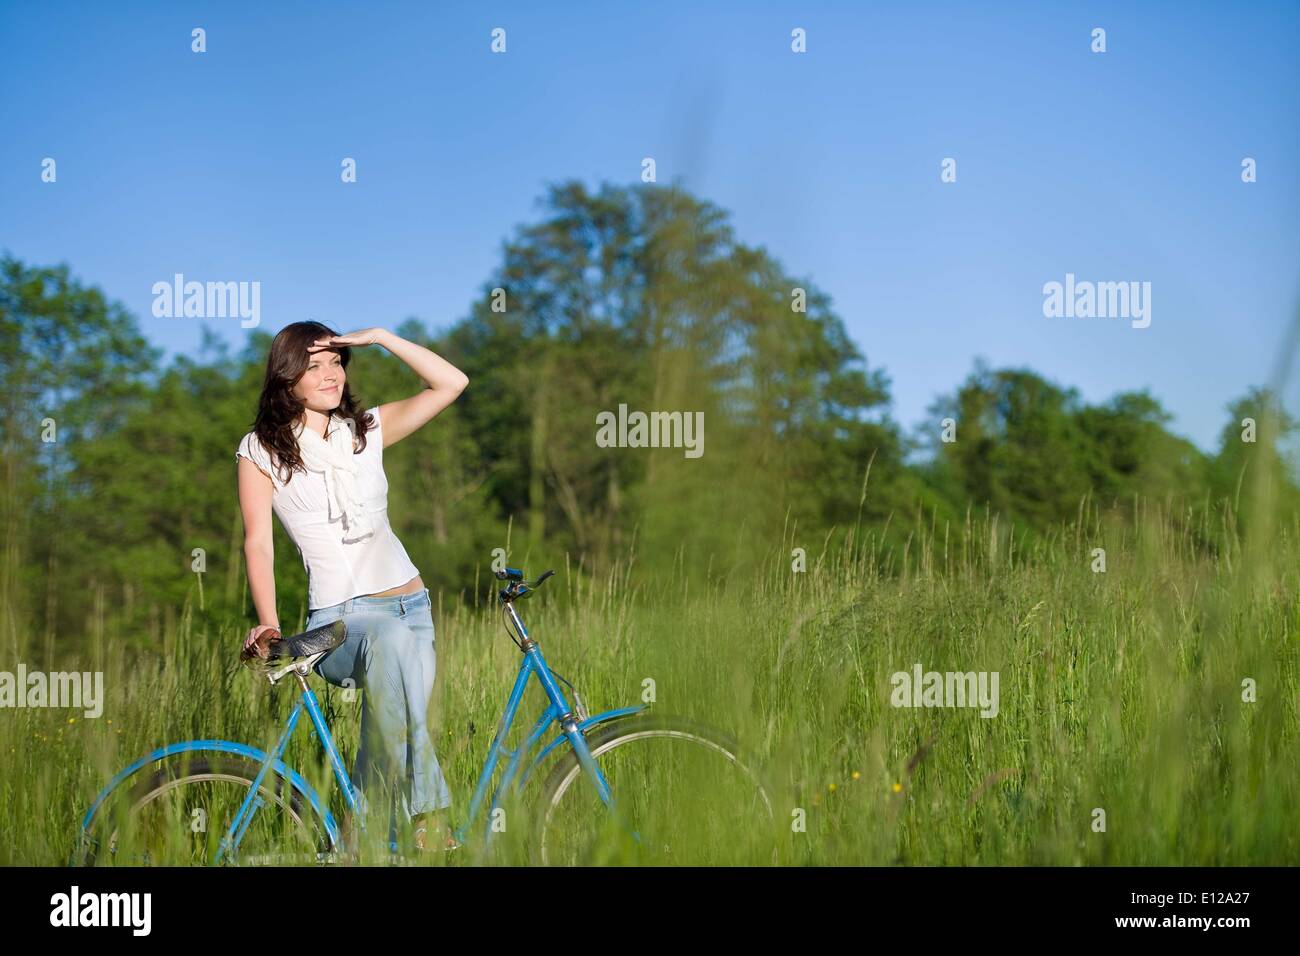 Jun. 05, 2010 - June 5, 2010 - Woman with old-fashioned bike in summer meadow on sunny day Stock Photo